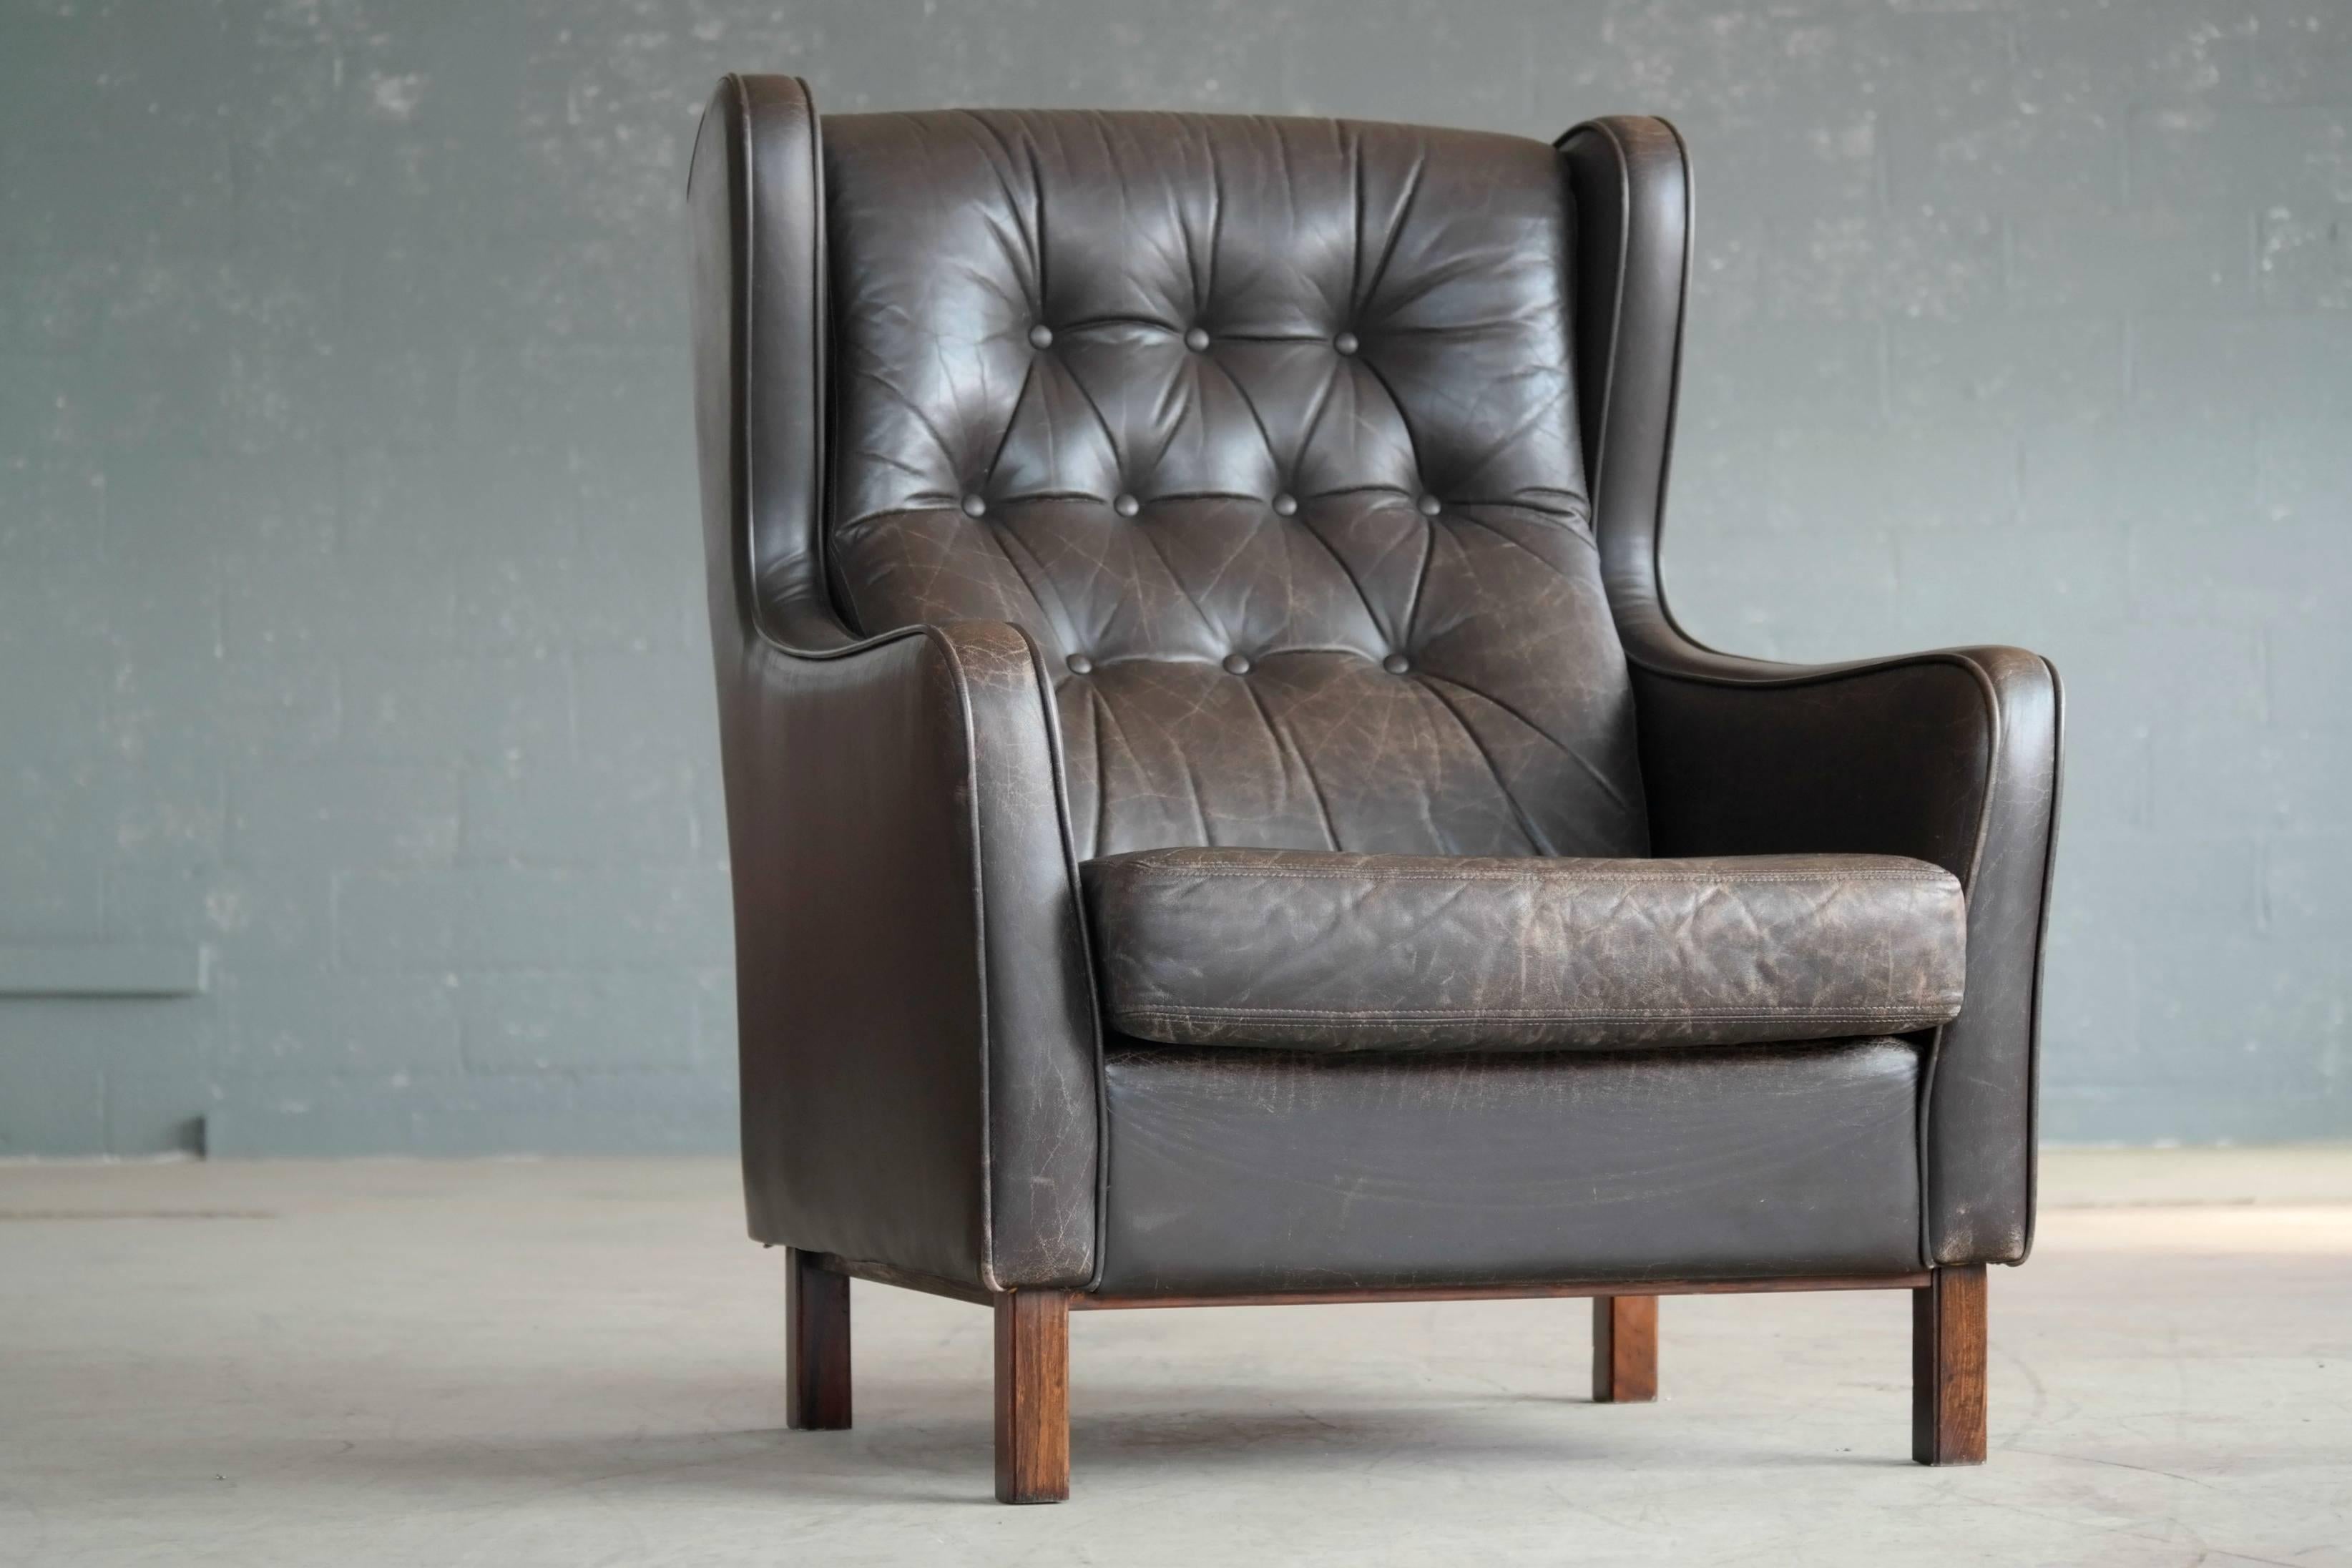 Mid-20th Century Børge Mogensen Style High Back Wing Chair with Tufted Back in Espresso Leather